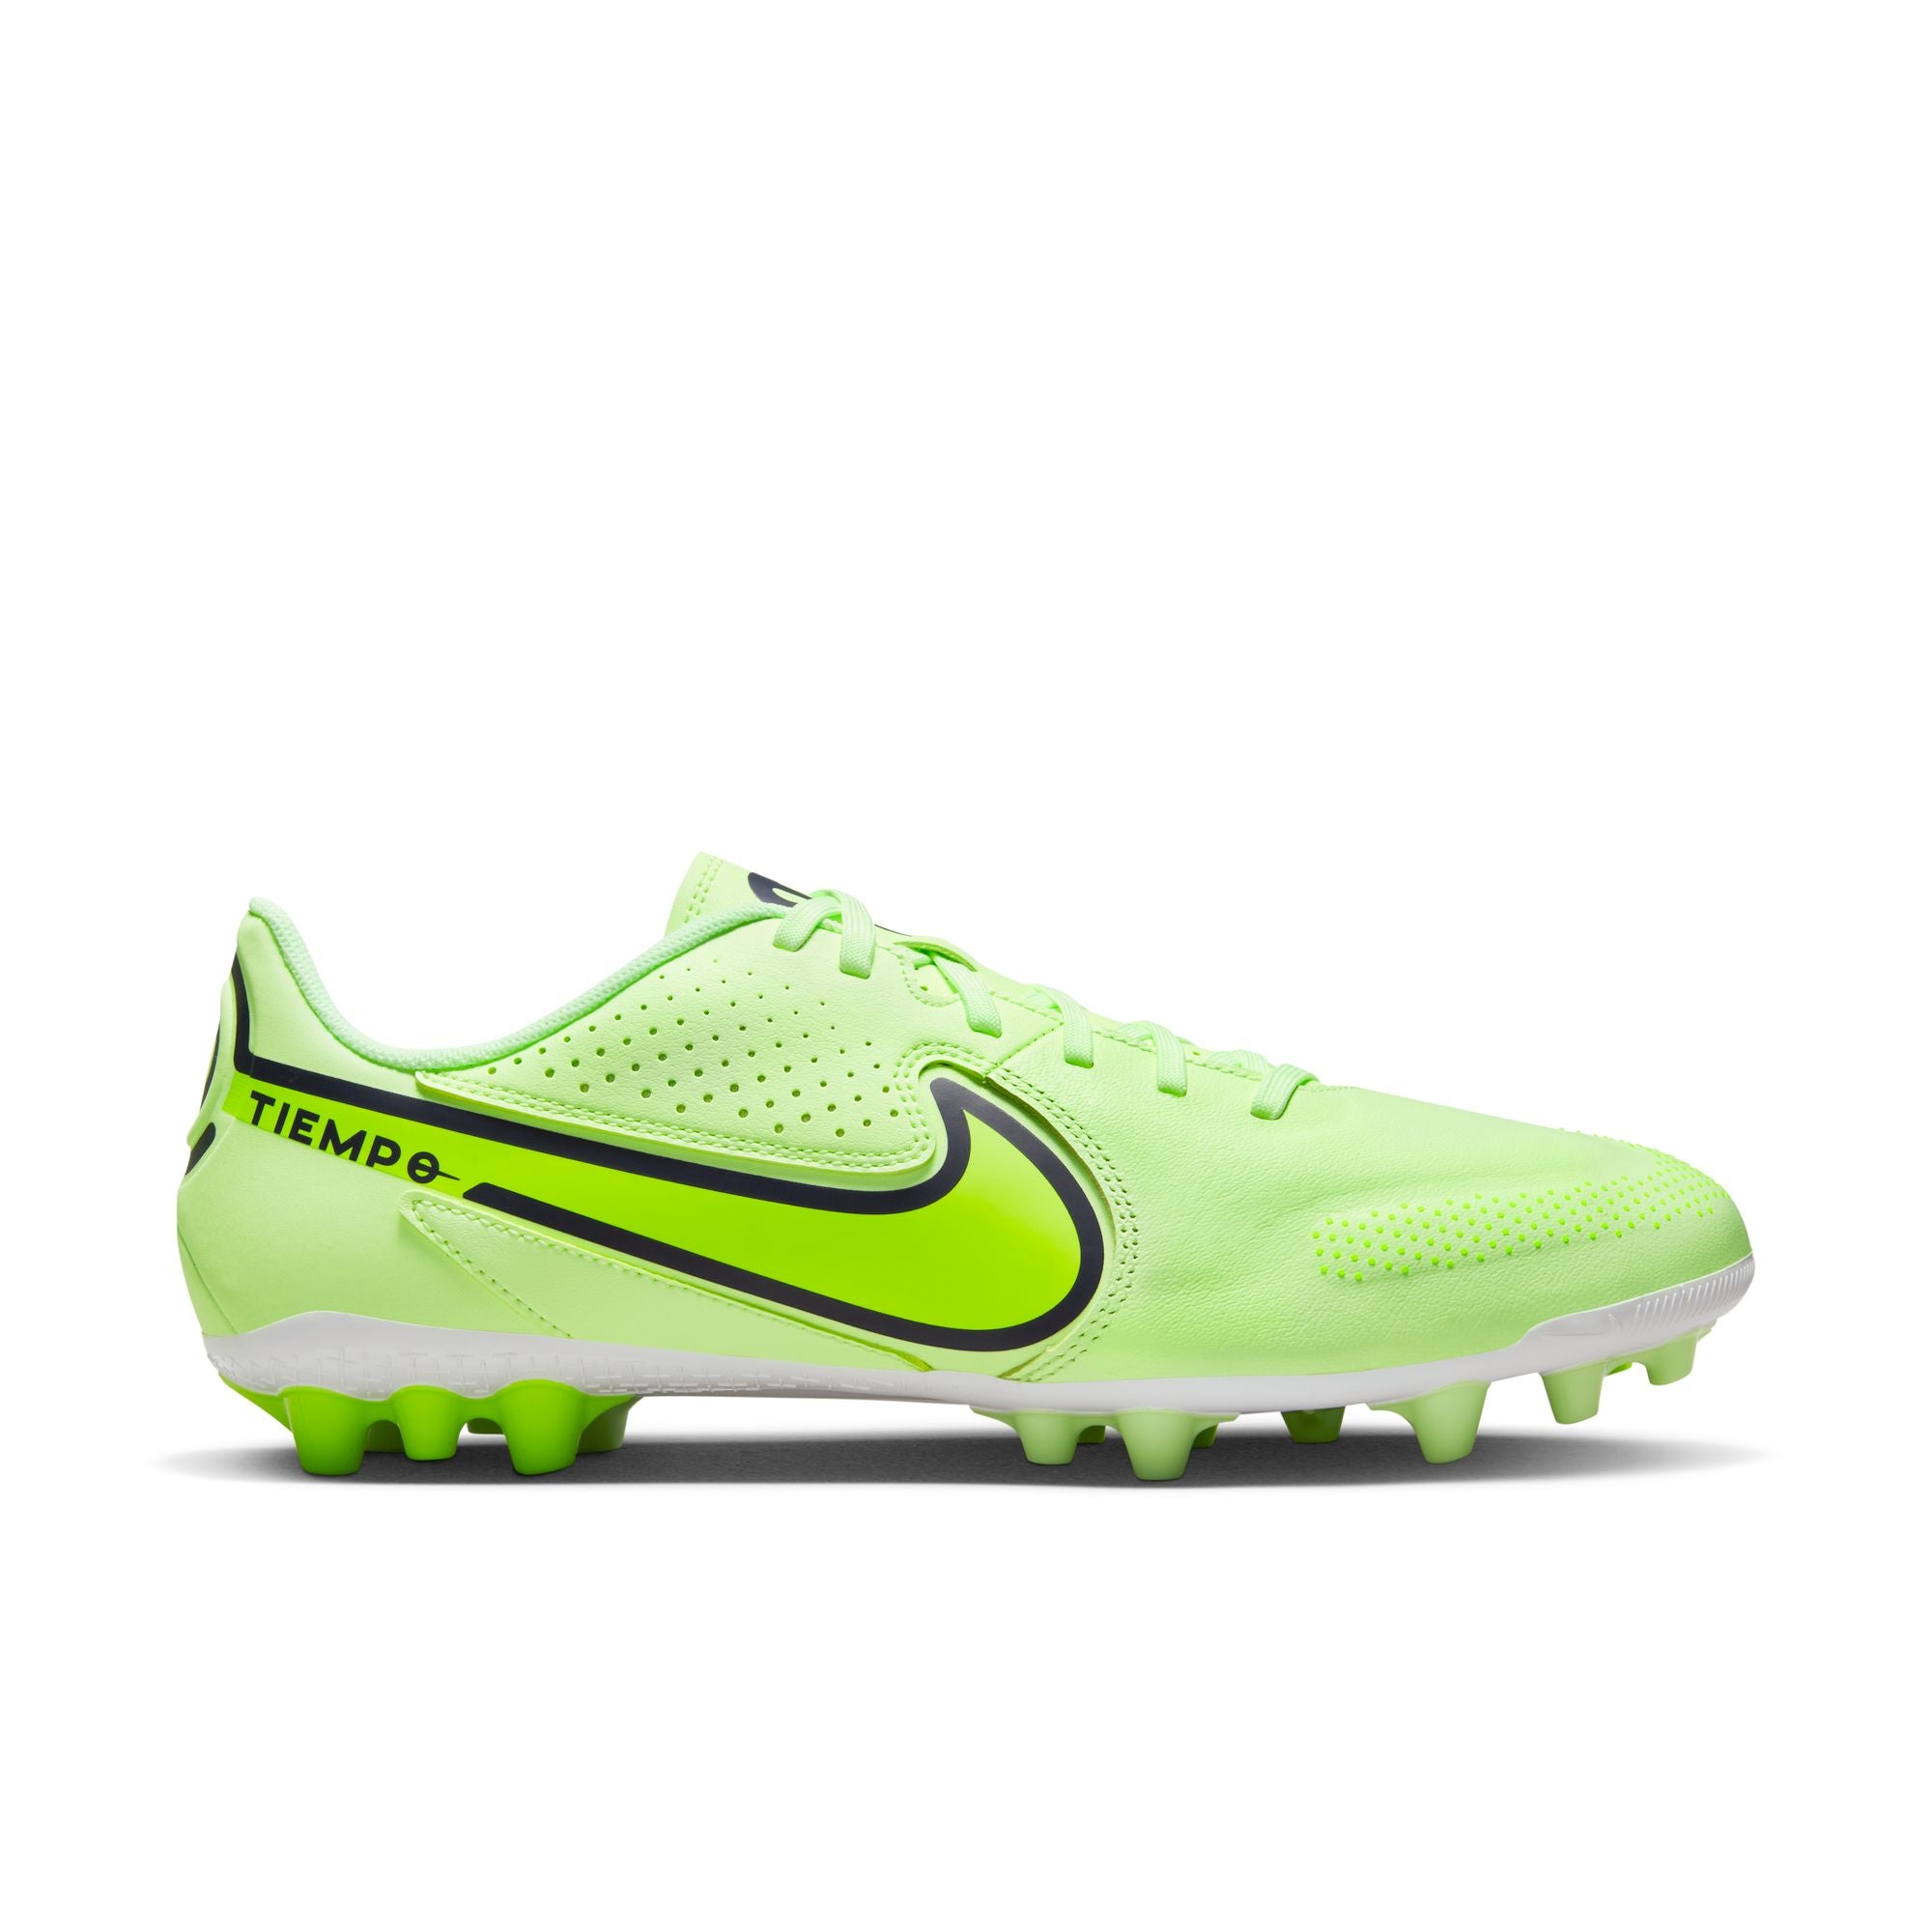 Nike Tiempo Legend Academy Soccer Cleat